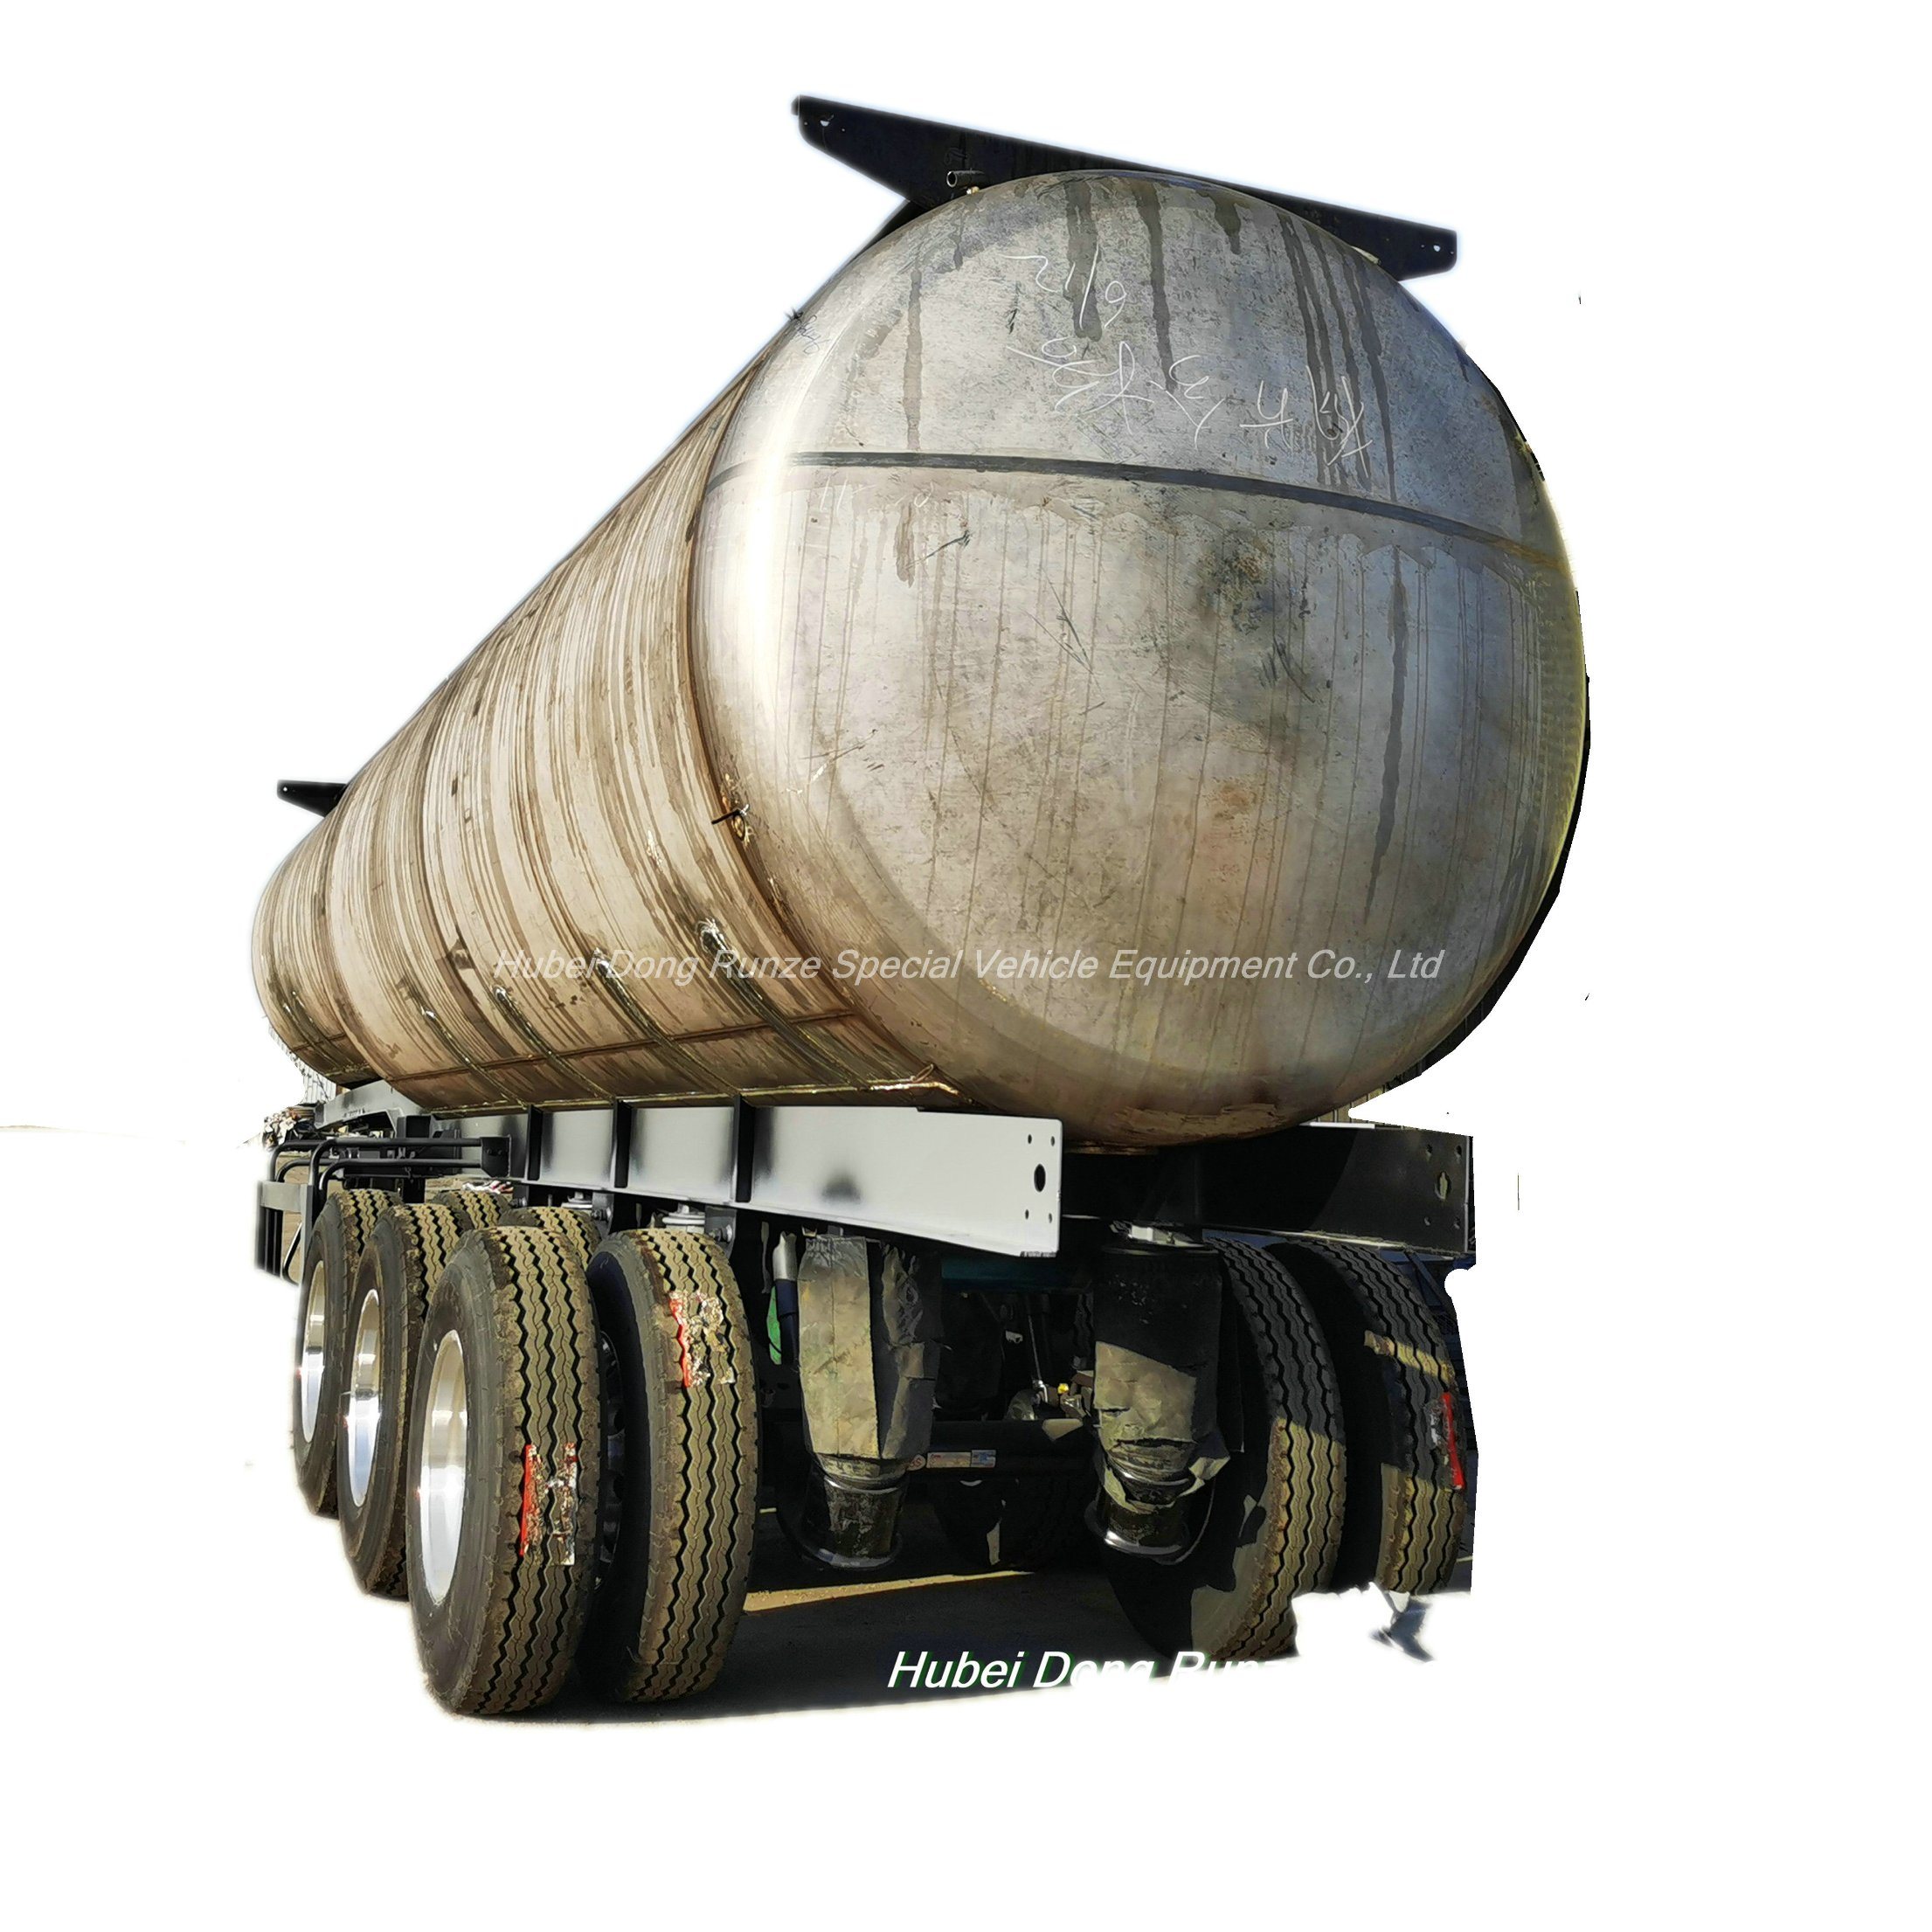  25 m3-60 M3 Stainless Tank for Trailer Transport Food Oil, Ethanol, Liquor, Win, Alcohol, Water Reducers